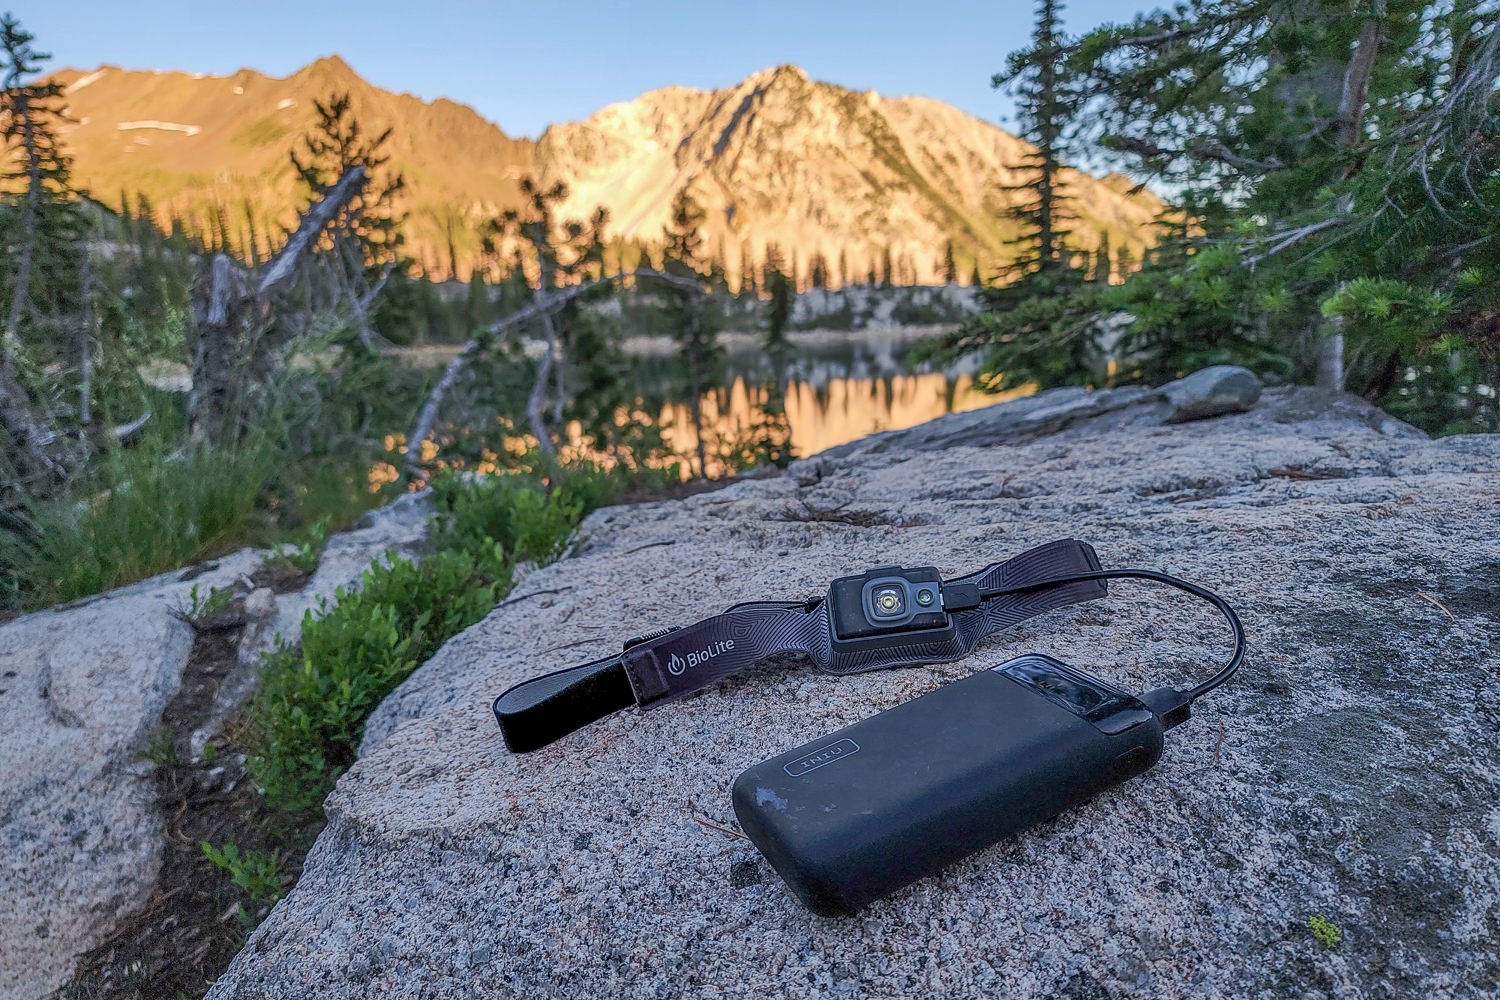 Using a portable power bank to charge the Biolite Headlamp 200 on the trail